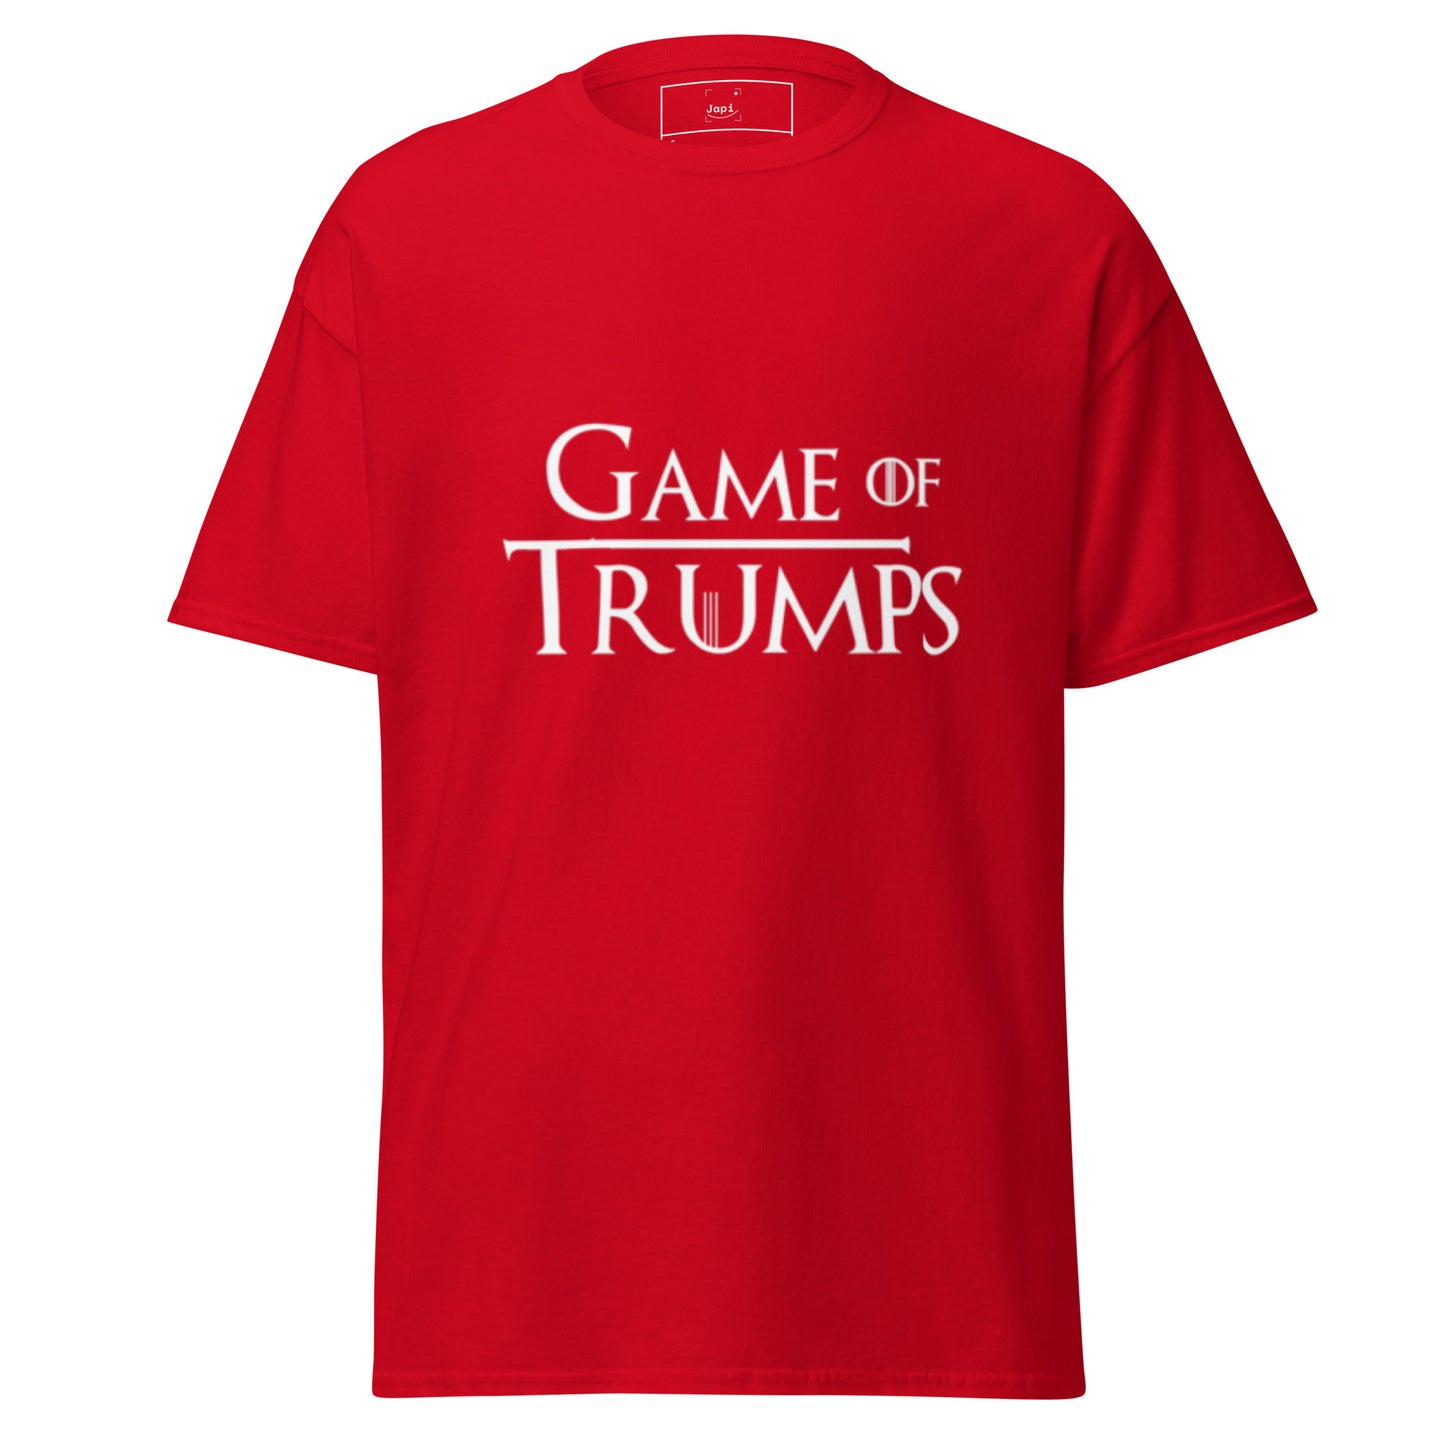 Game of Trumps T-shirt